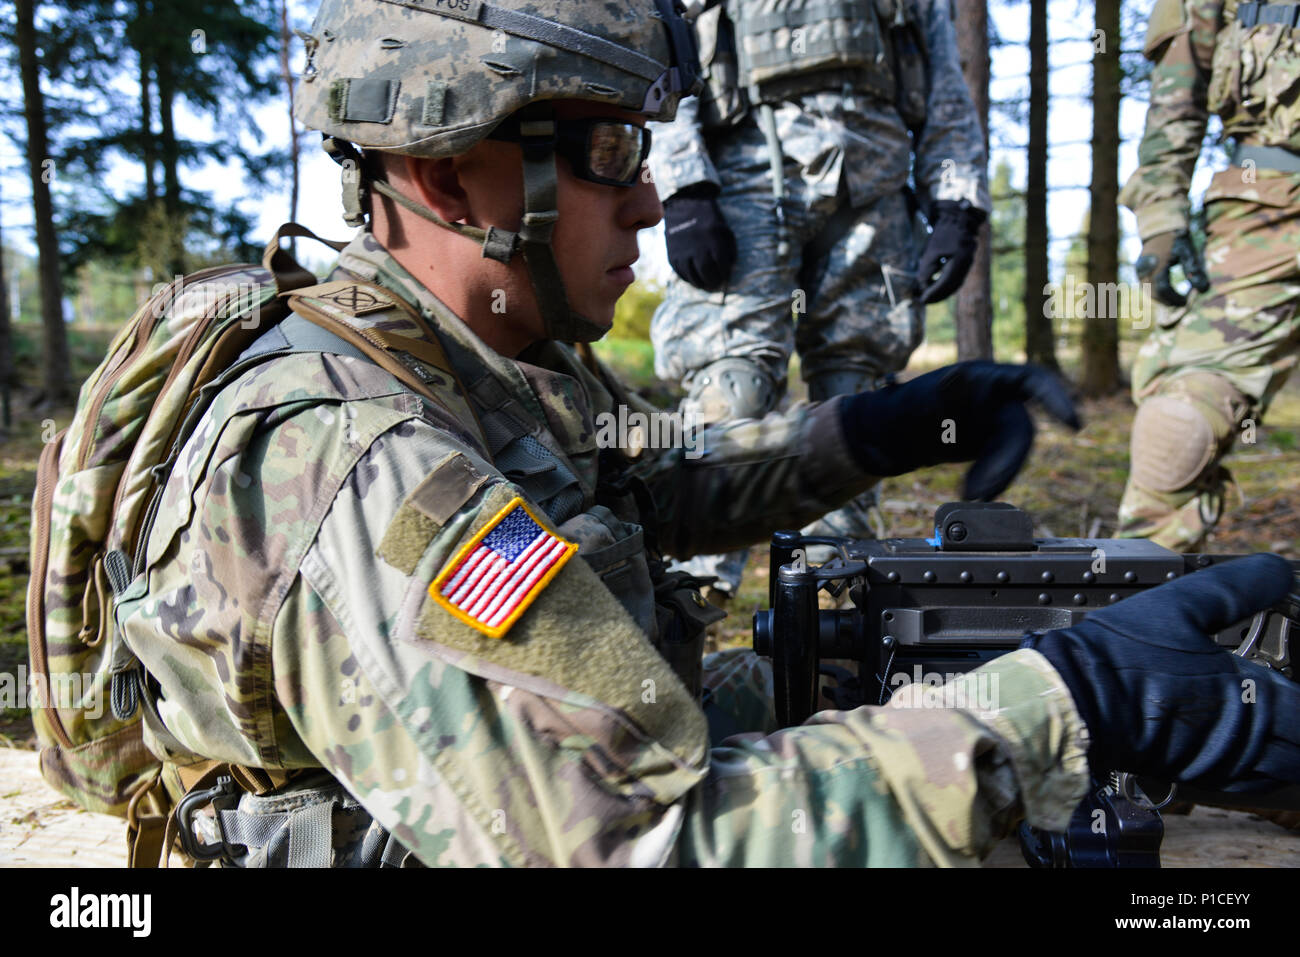 A U.S. Soldier, assigned to the 1st Battalion, 4th Infantry Regiment trains how to clear, load, correct a malfunction, unload and clear a .50 Caliber Machine Gun during the 173rd Airborne Brigade’s Expert Infantryman Badge (EIB) training phase at the 7th Army Training Command’s Grafenwoehr Training Area, Germany, Oct. 17. 2016. The purpose of the EIB is to recognize  Infantryman who have demonstrated a mastery of critical tasks that built the core foundation of individual proficiency that allow them to locate, close with, and destroy the enemy through fire and maneuver and repel an enemy assau Stock Photo